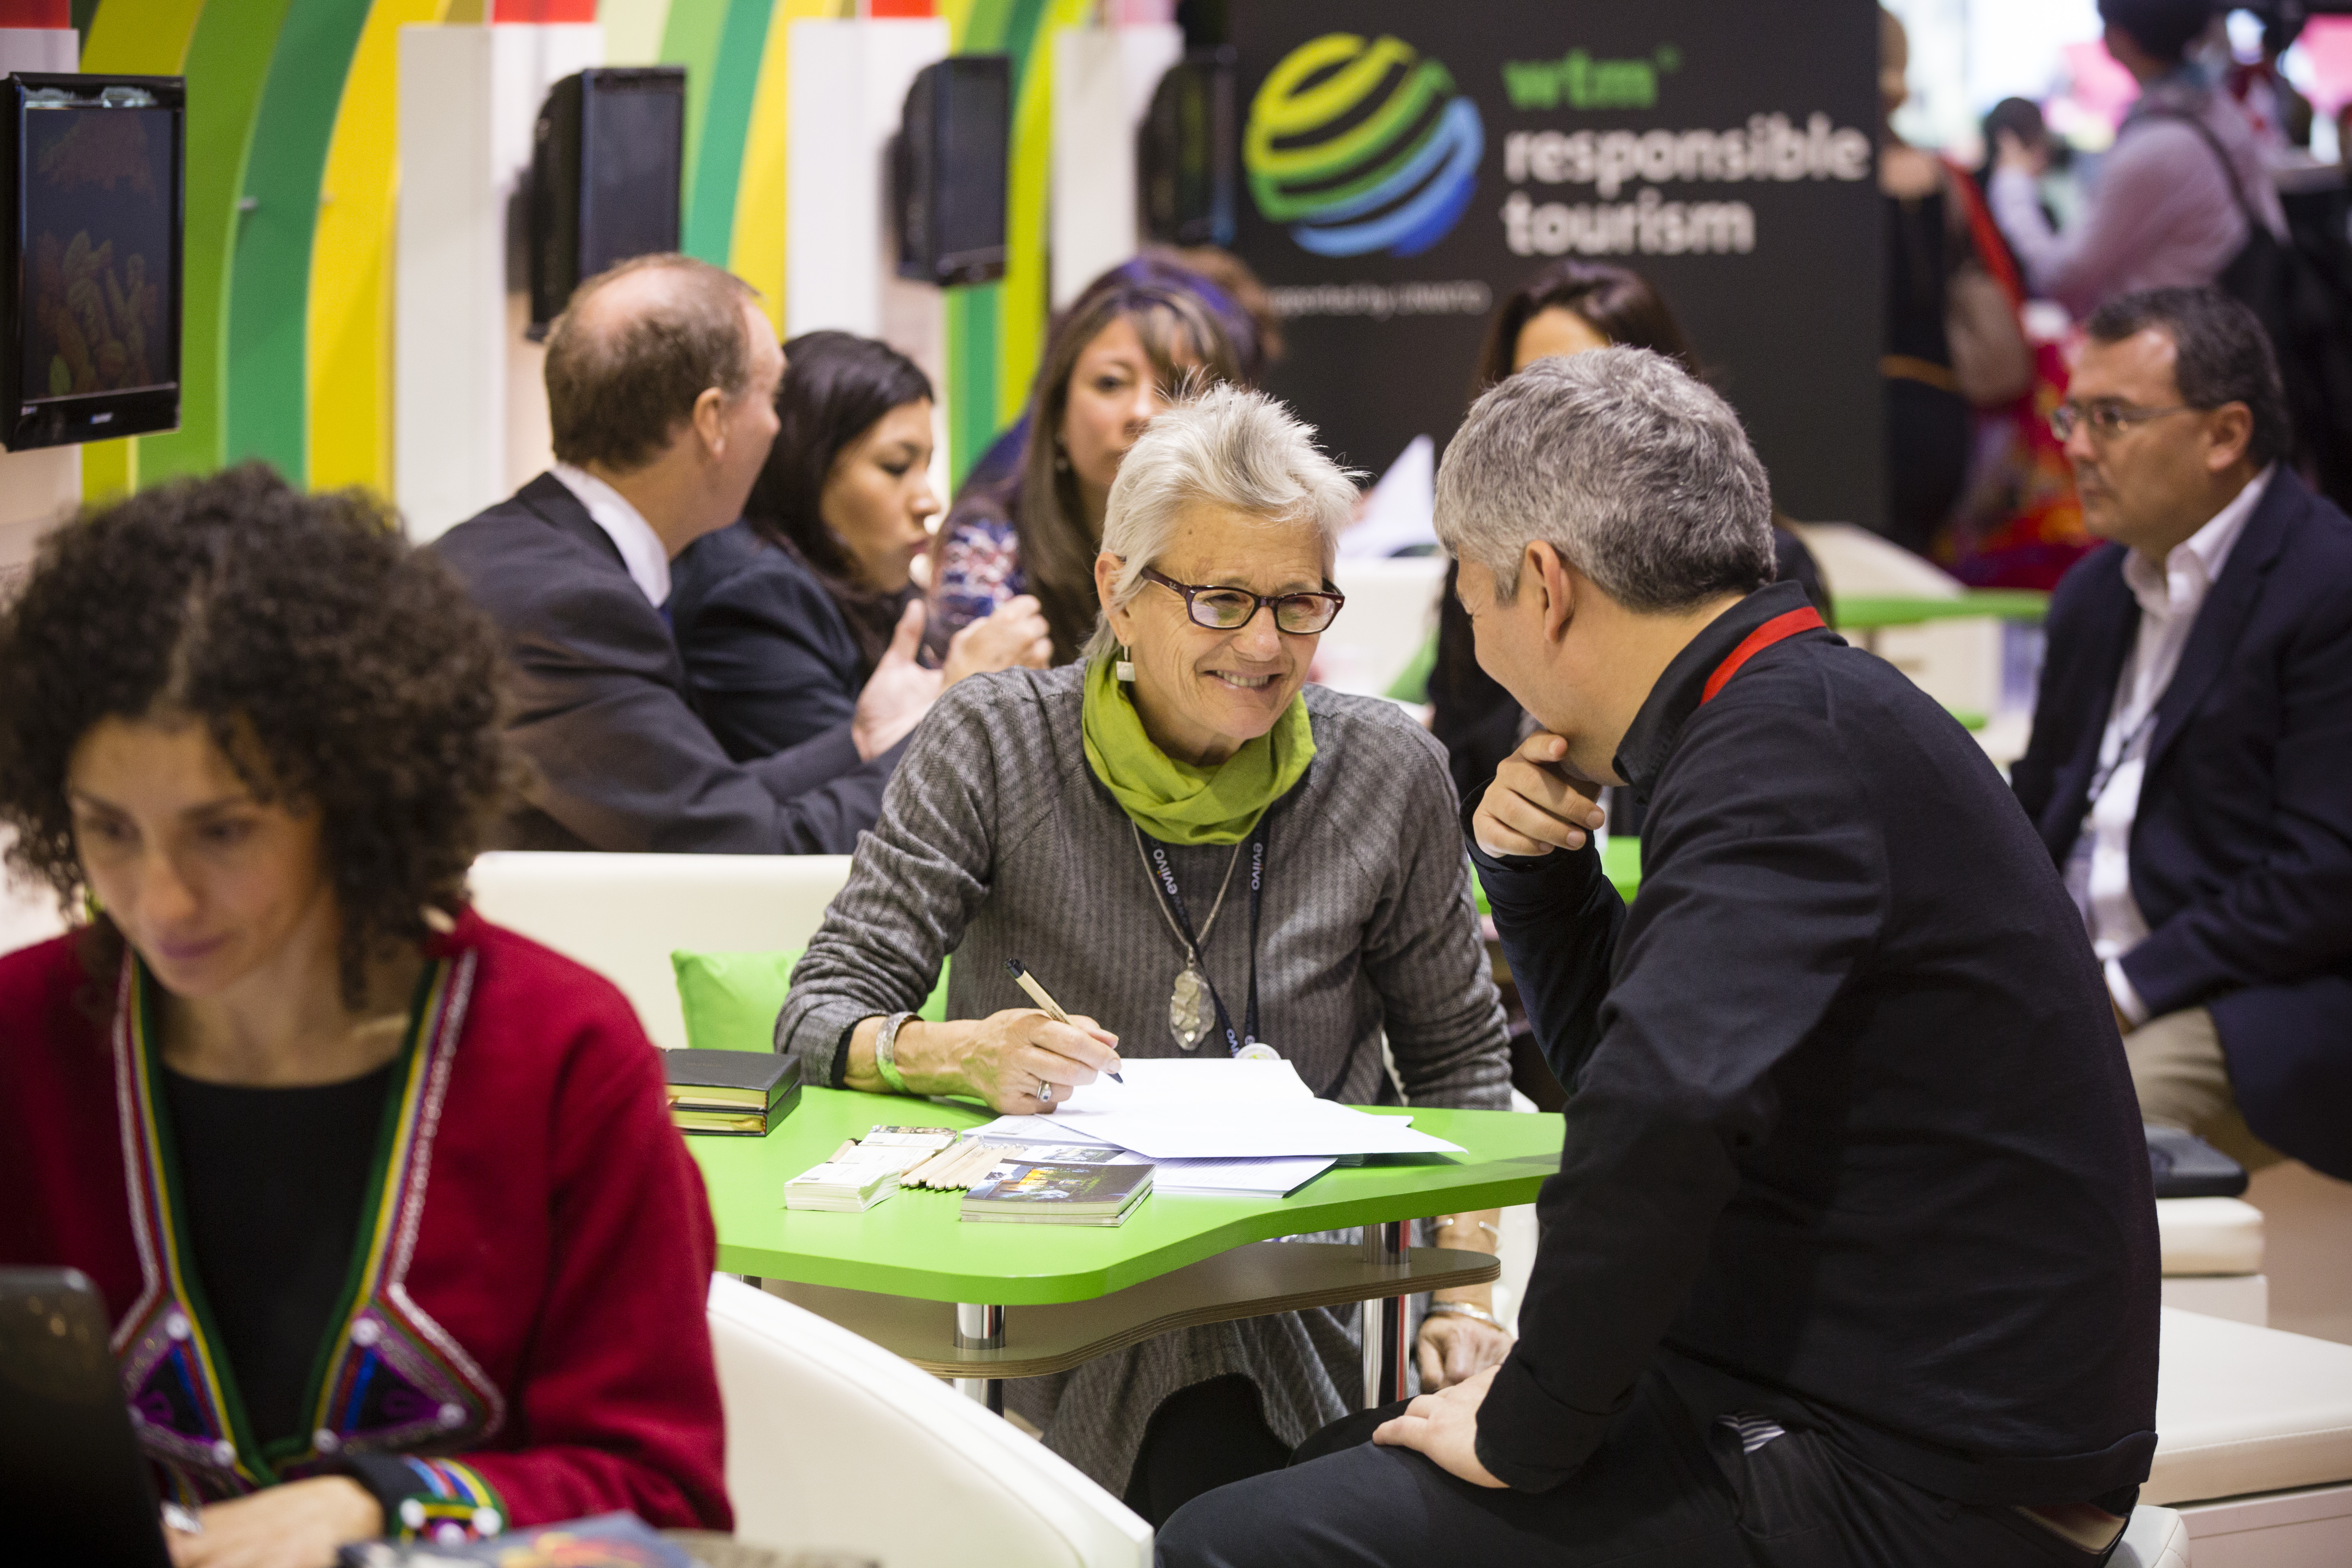 Announcing the WTM Responsible Tourism programme: expect some lively debate